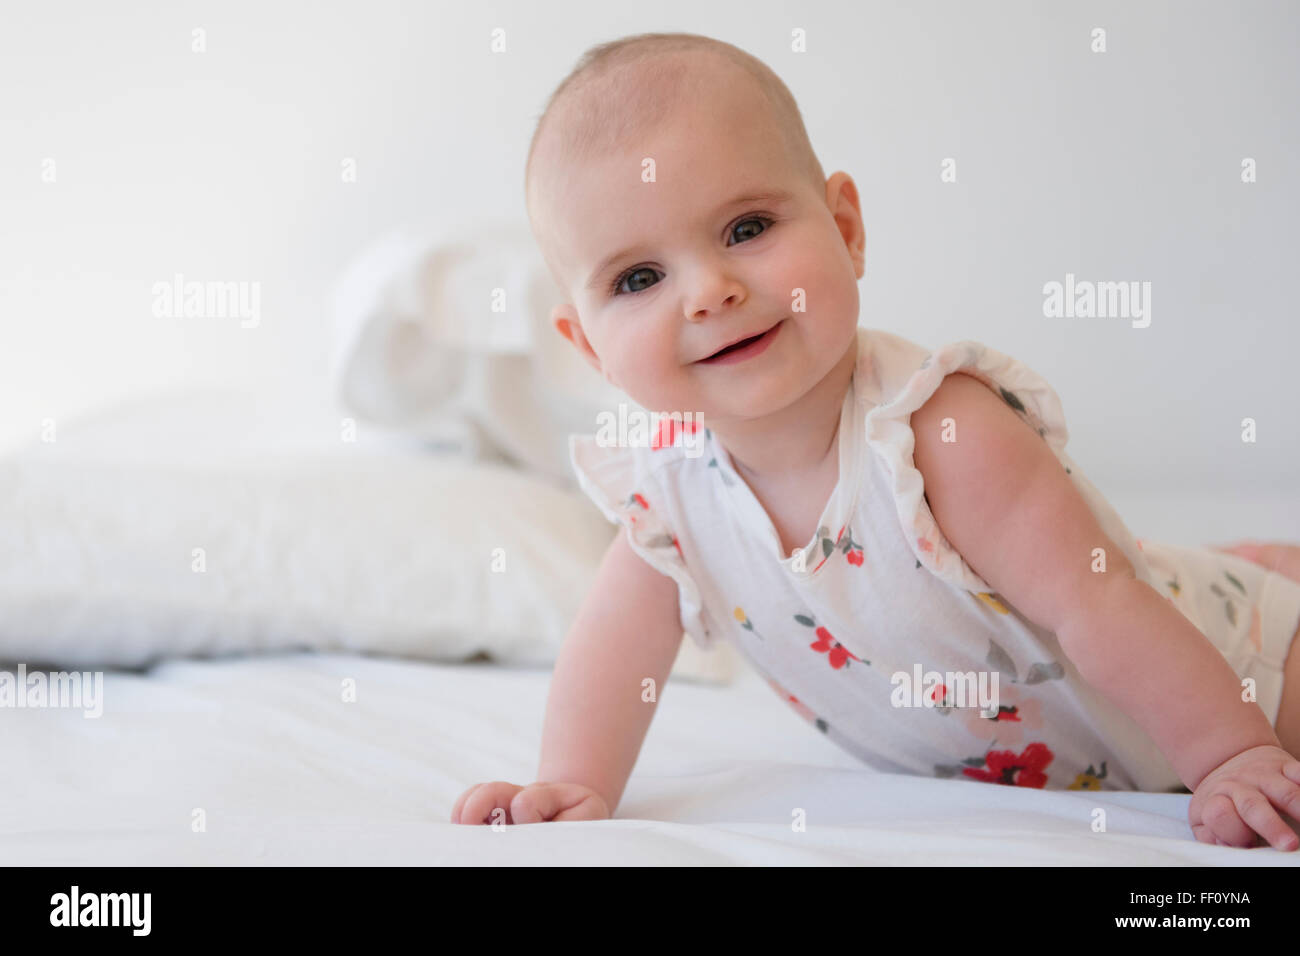 Caucasian baby girl crawling on bed Banque D'Images